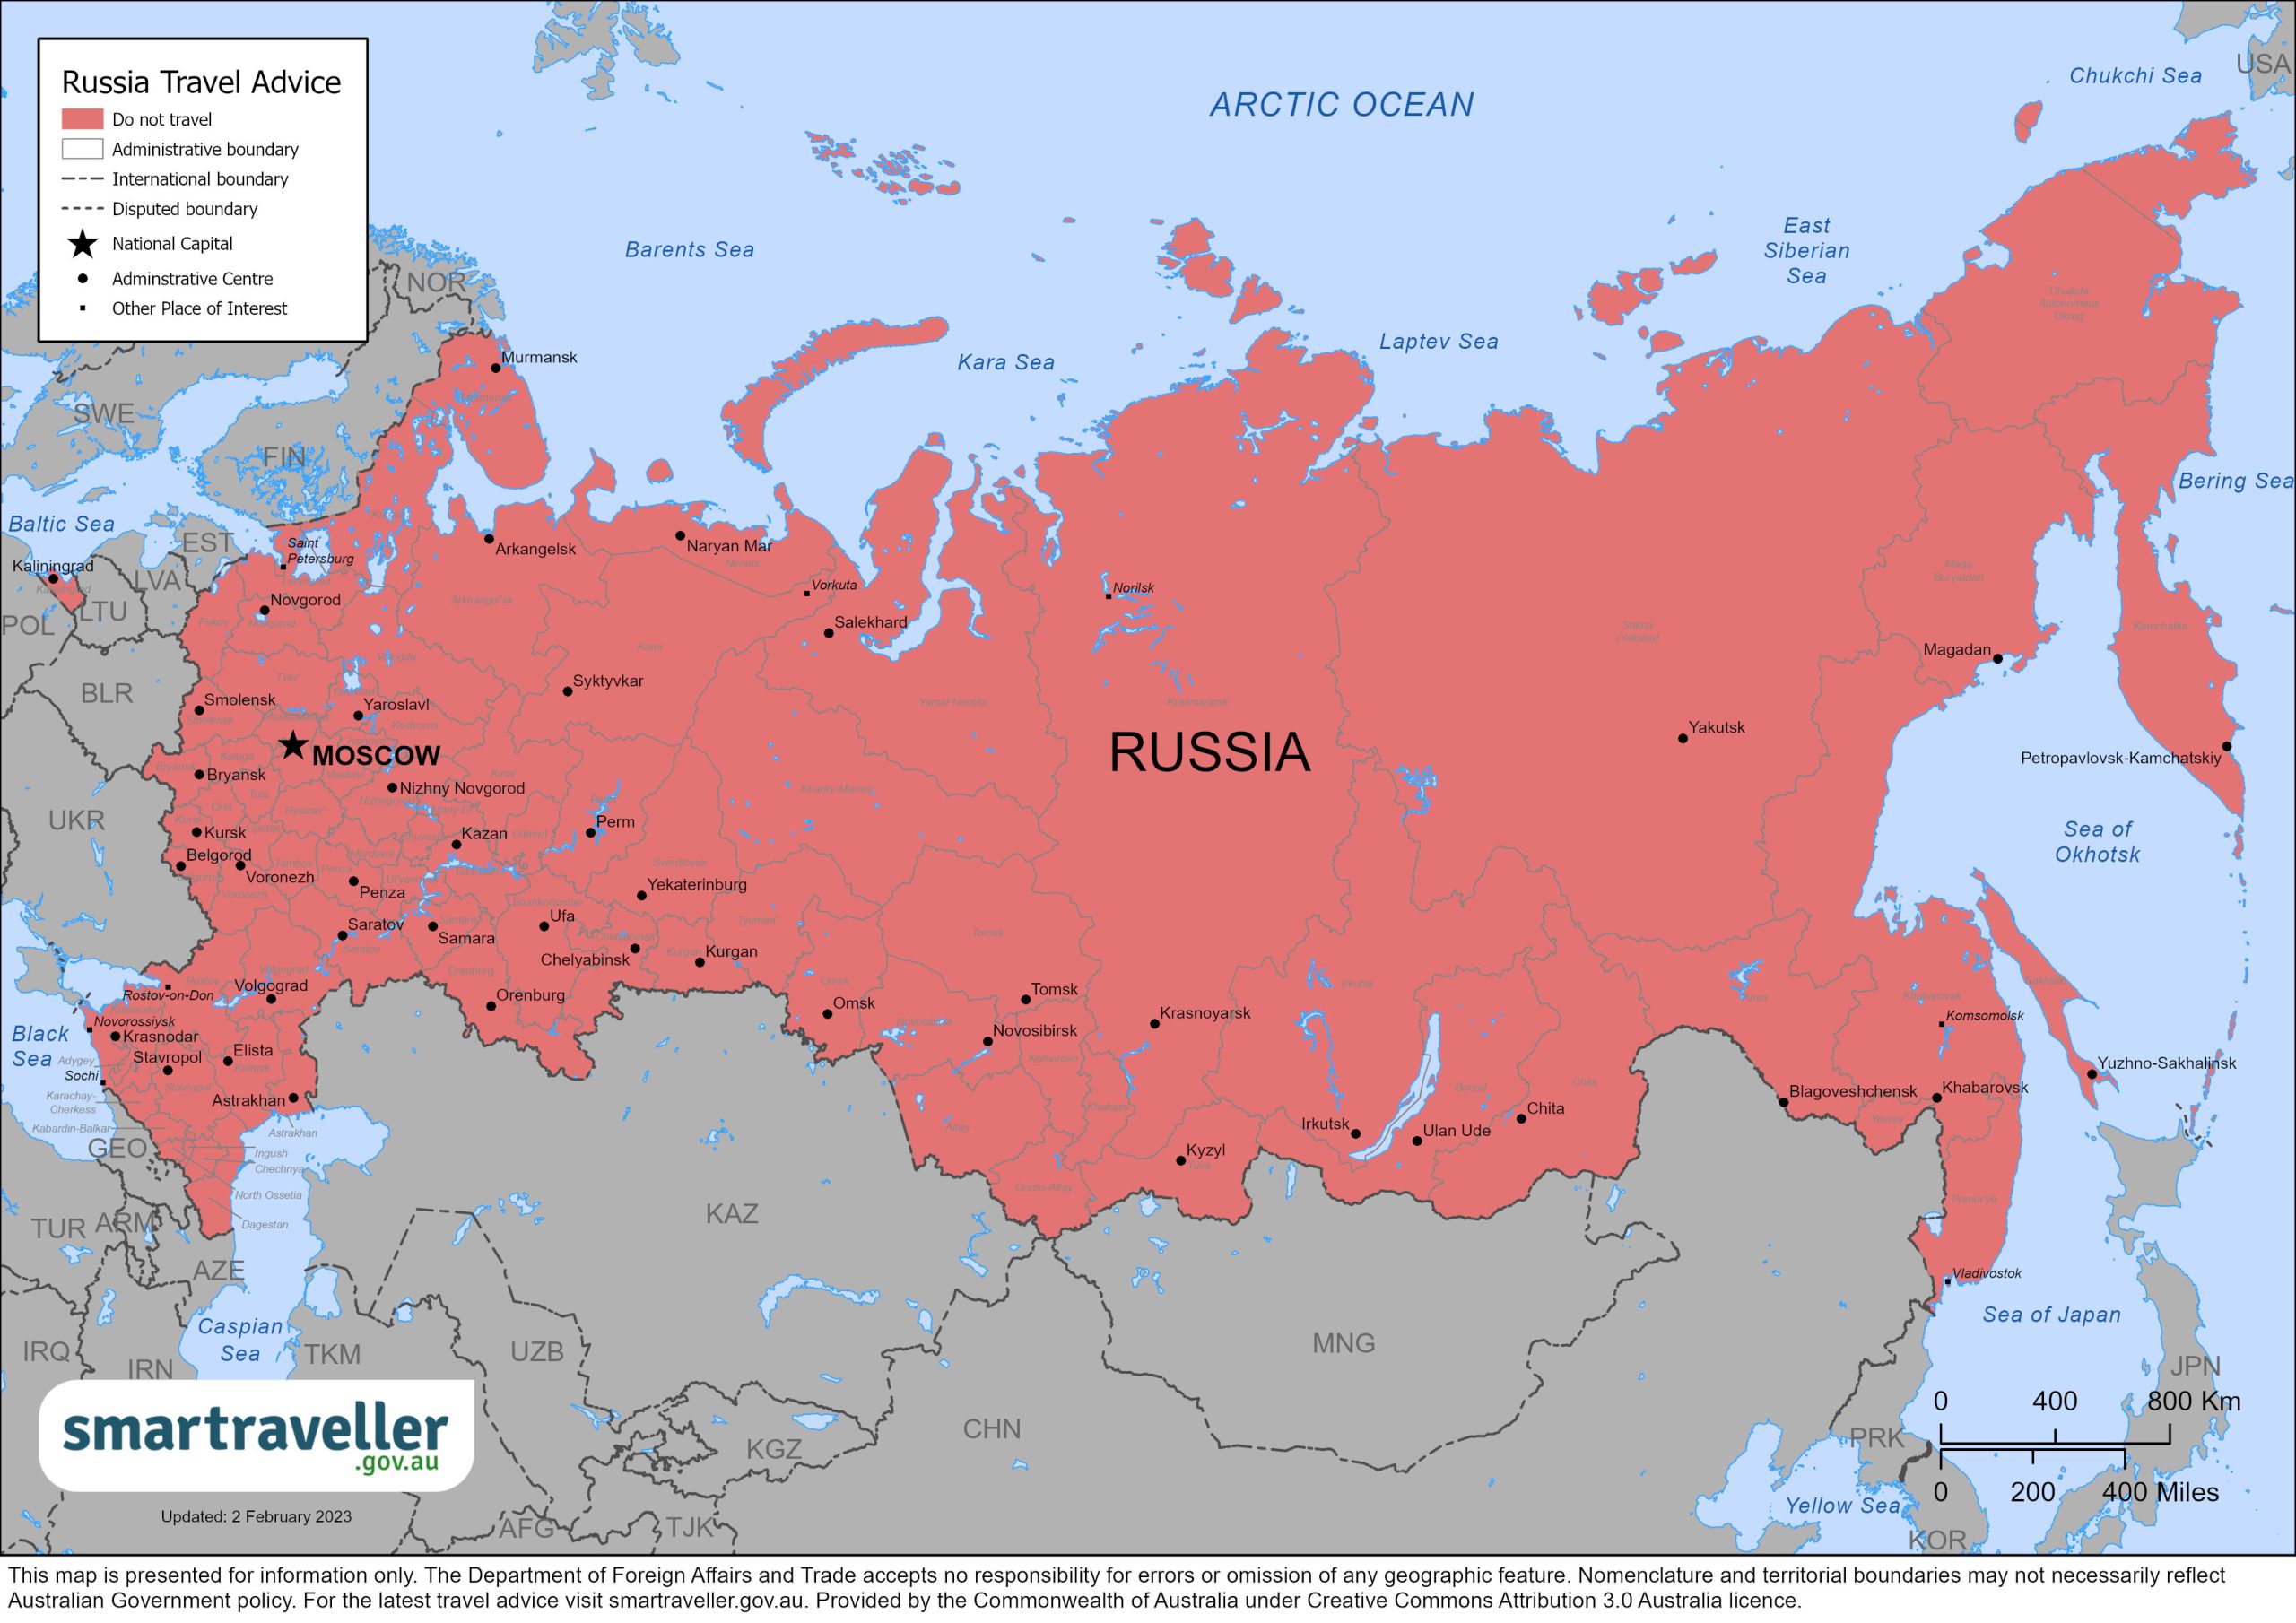 Russia, The World’s Largest Country